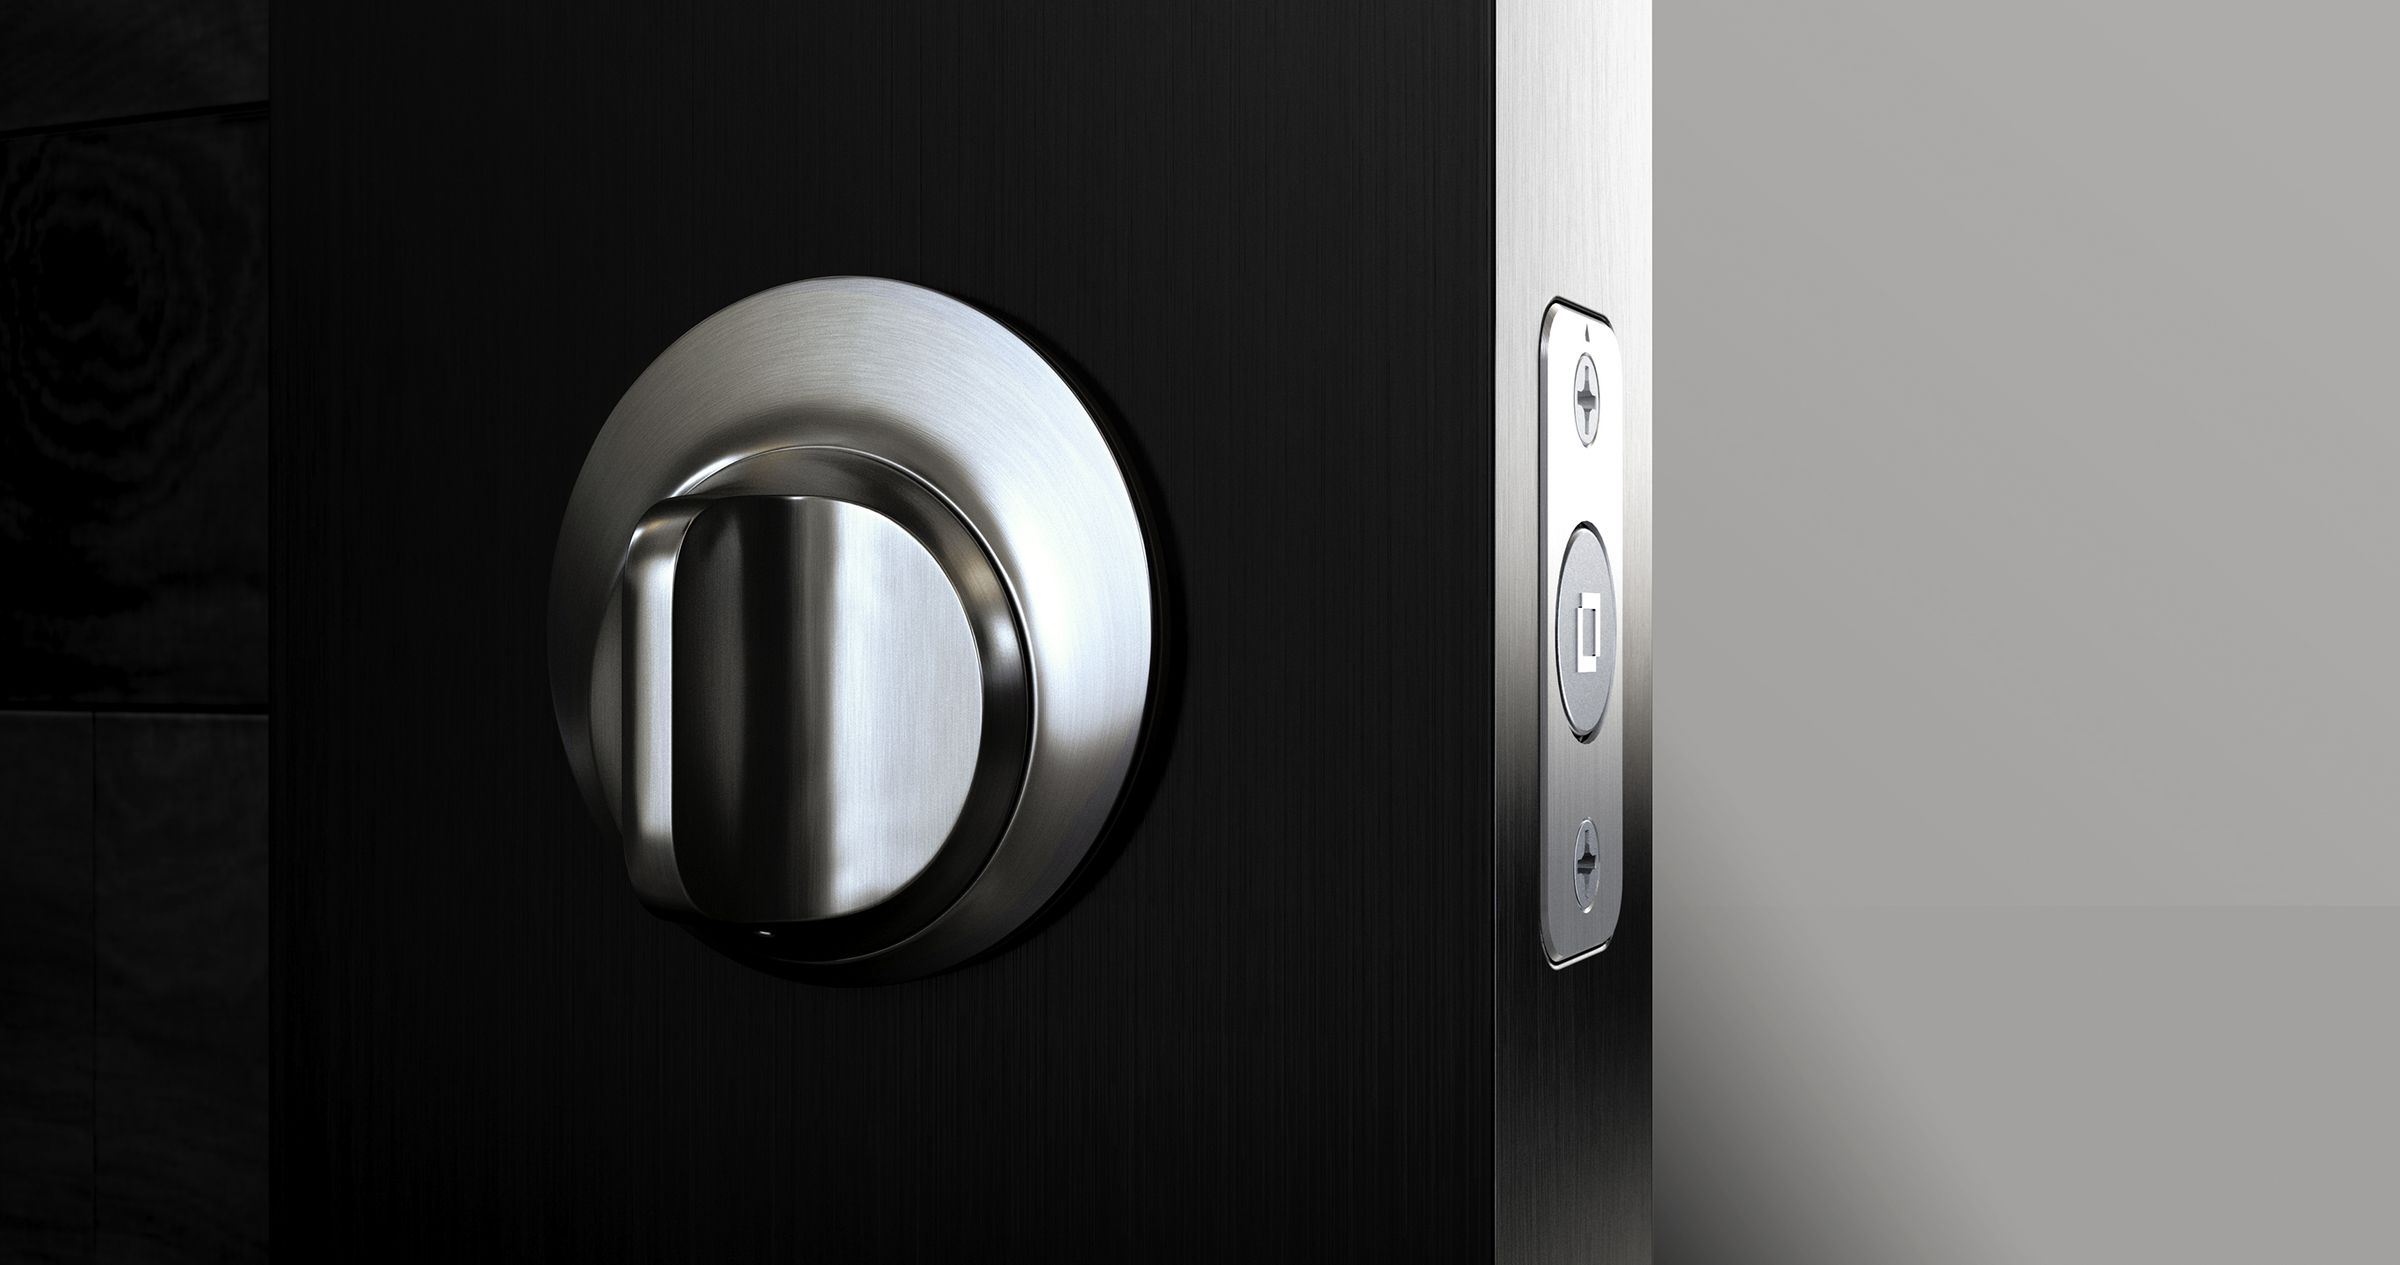 The Level Touch installs in the same way as a standard deadbolt with a single screwdriver